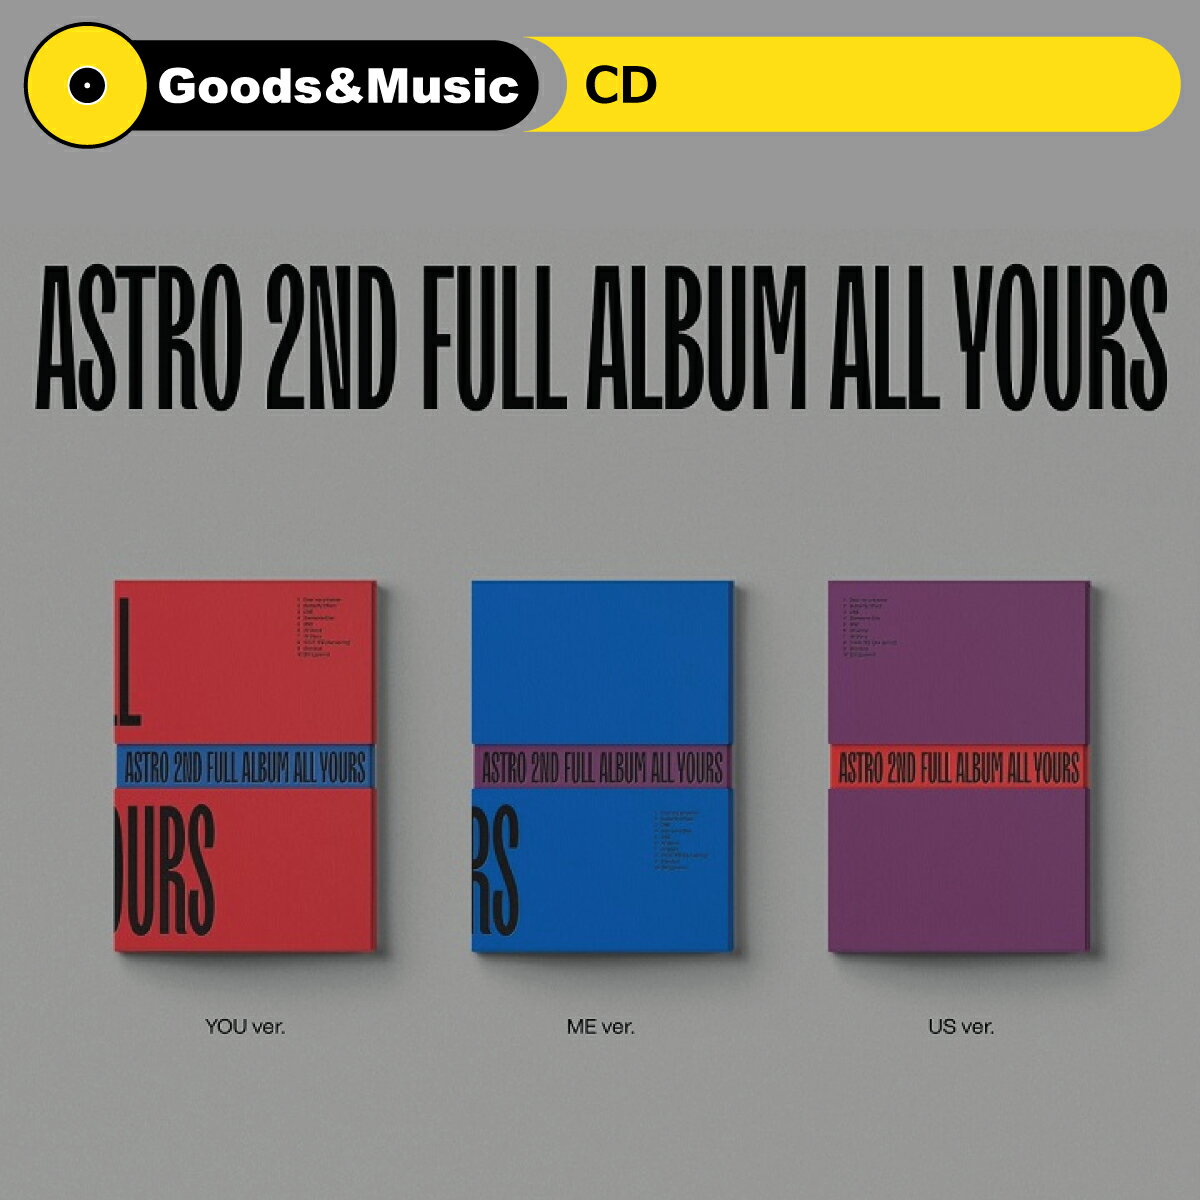 【VER選択】【和訳選択】ASTRO ALL YOURS 2ND FULL ALBUM アストロ 2集 正規アルバム【弊店限定特典】【安心国内発送】